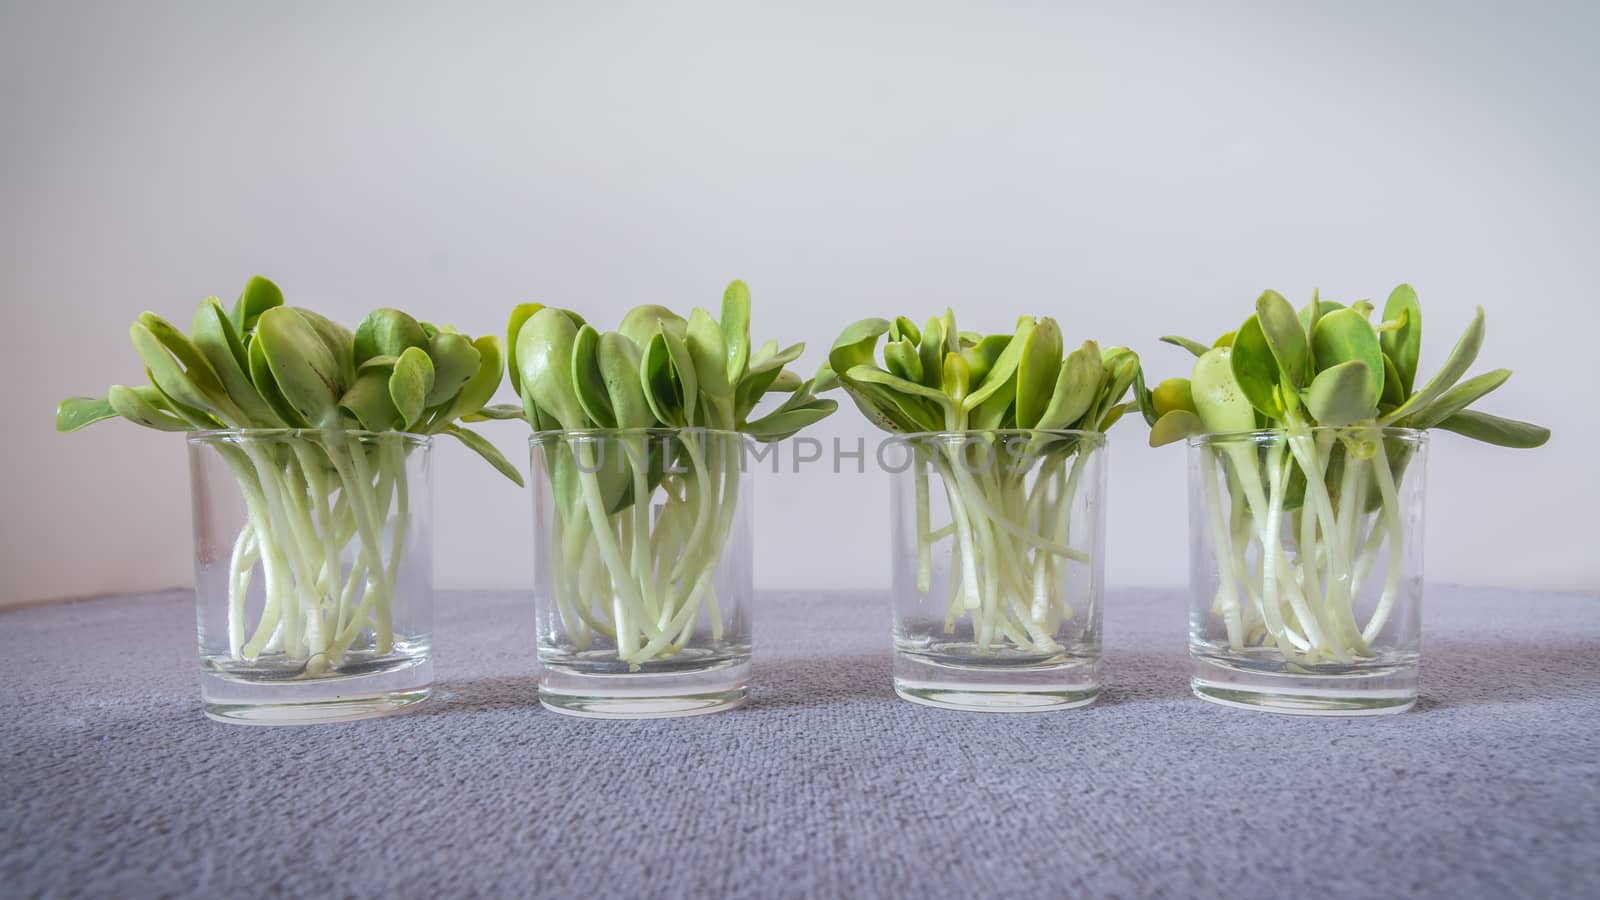 Arranged sunflower sprouts in glassware, soft grey background







Sunflower sprouts